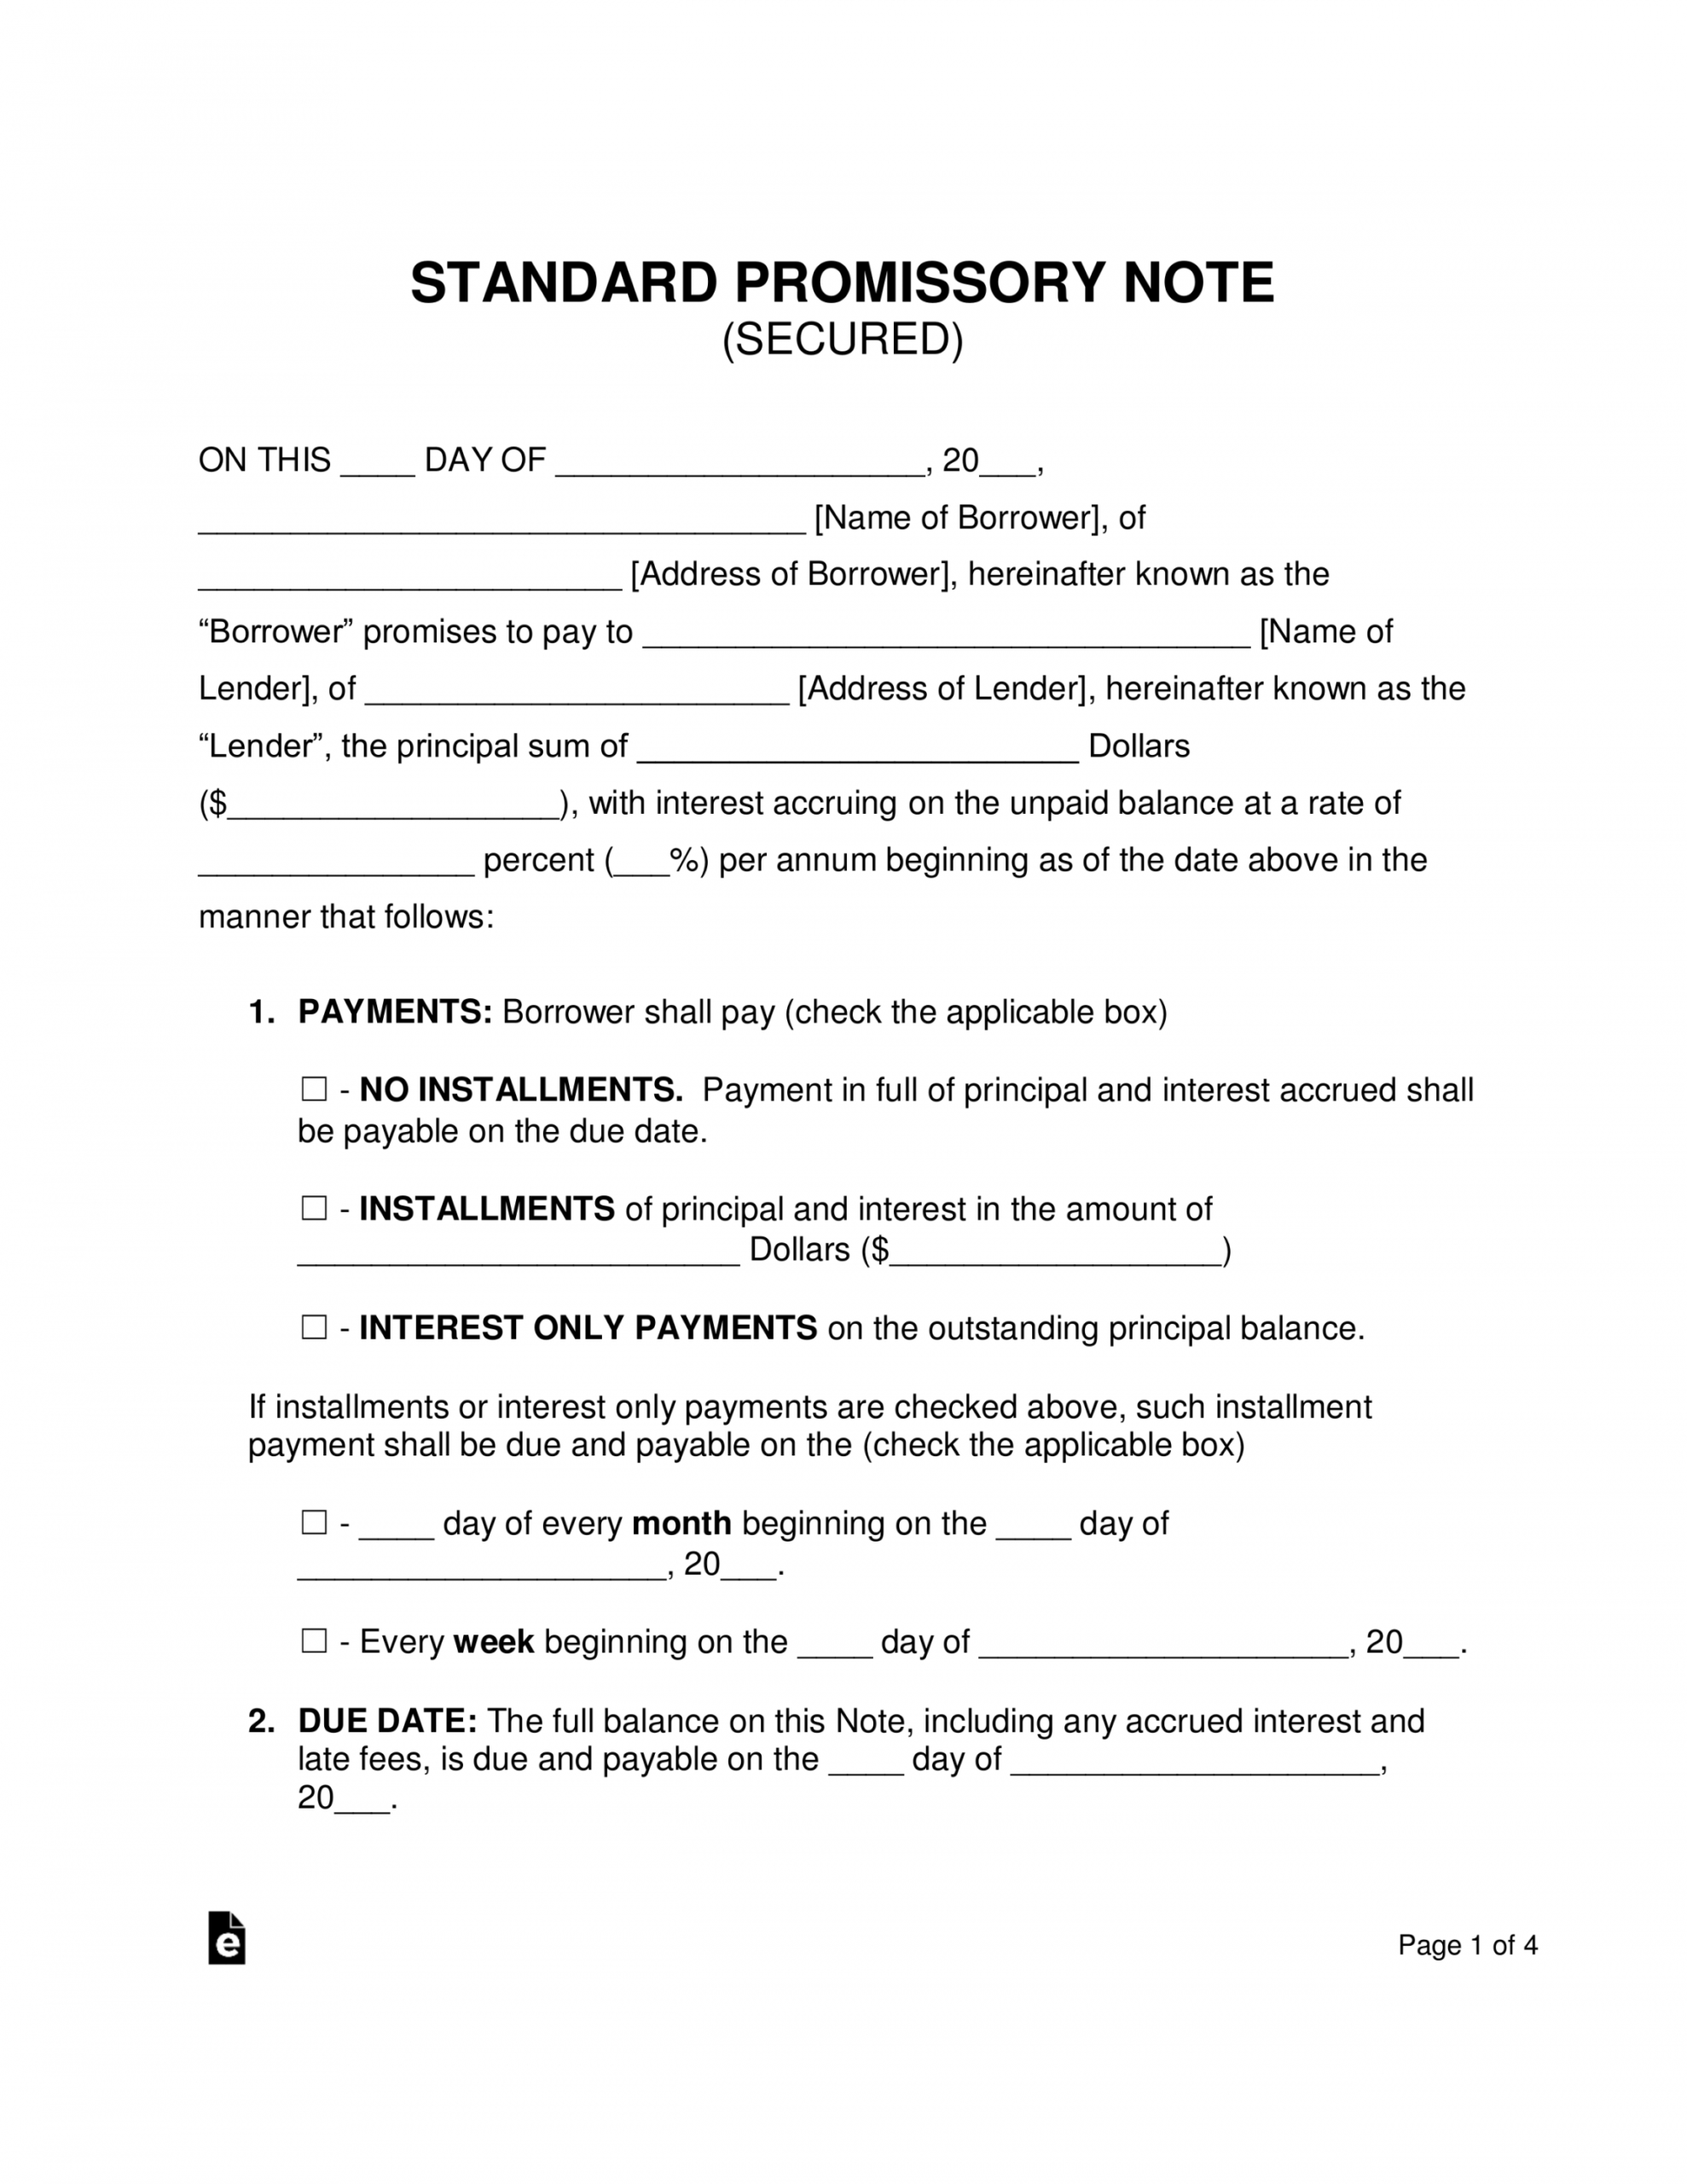 sample free secured promissory note template  word  pdf  eforms real estate promissory note template pdf